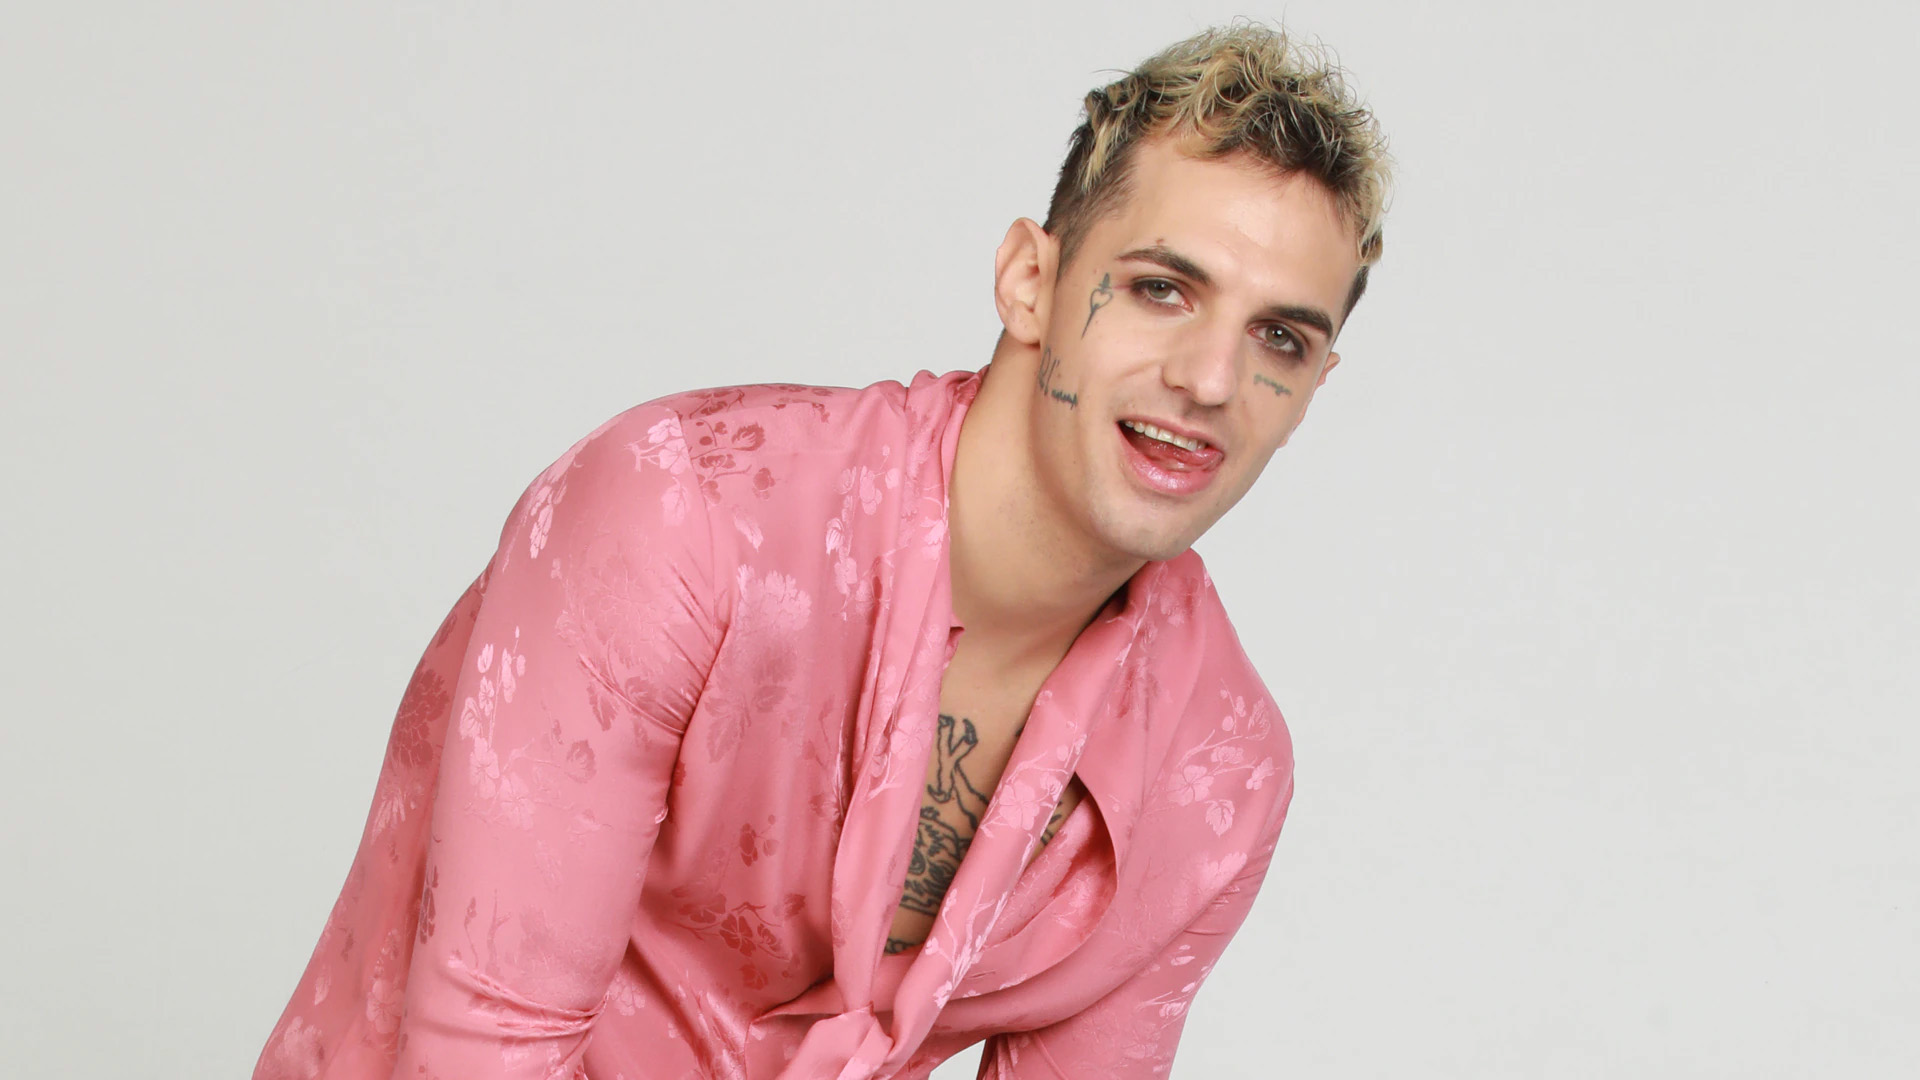 Sanremo 2023, Achille Lauro, New Guest For Festival Announced by Amadeus